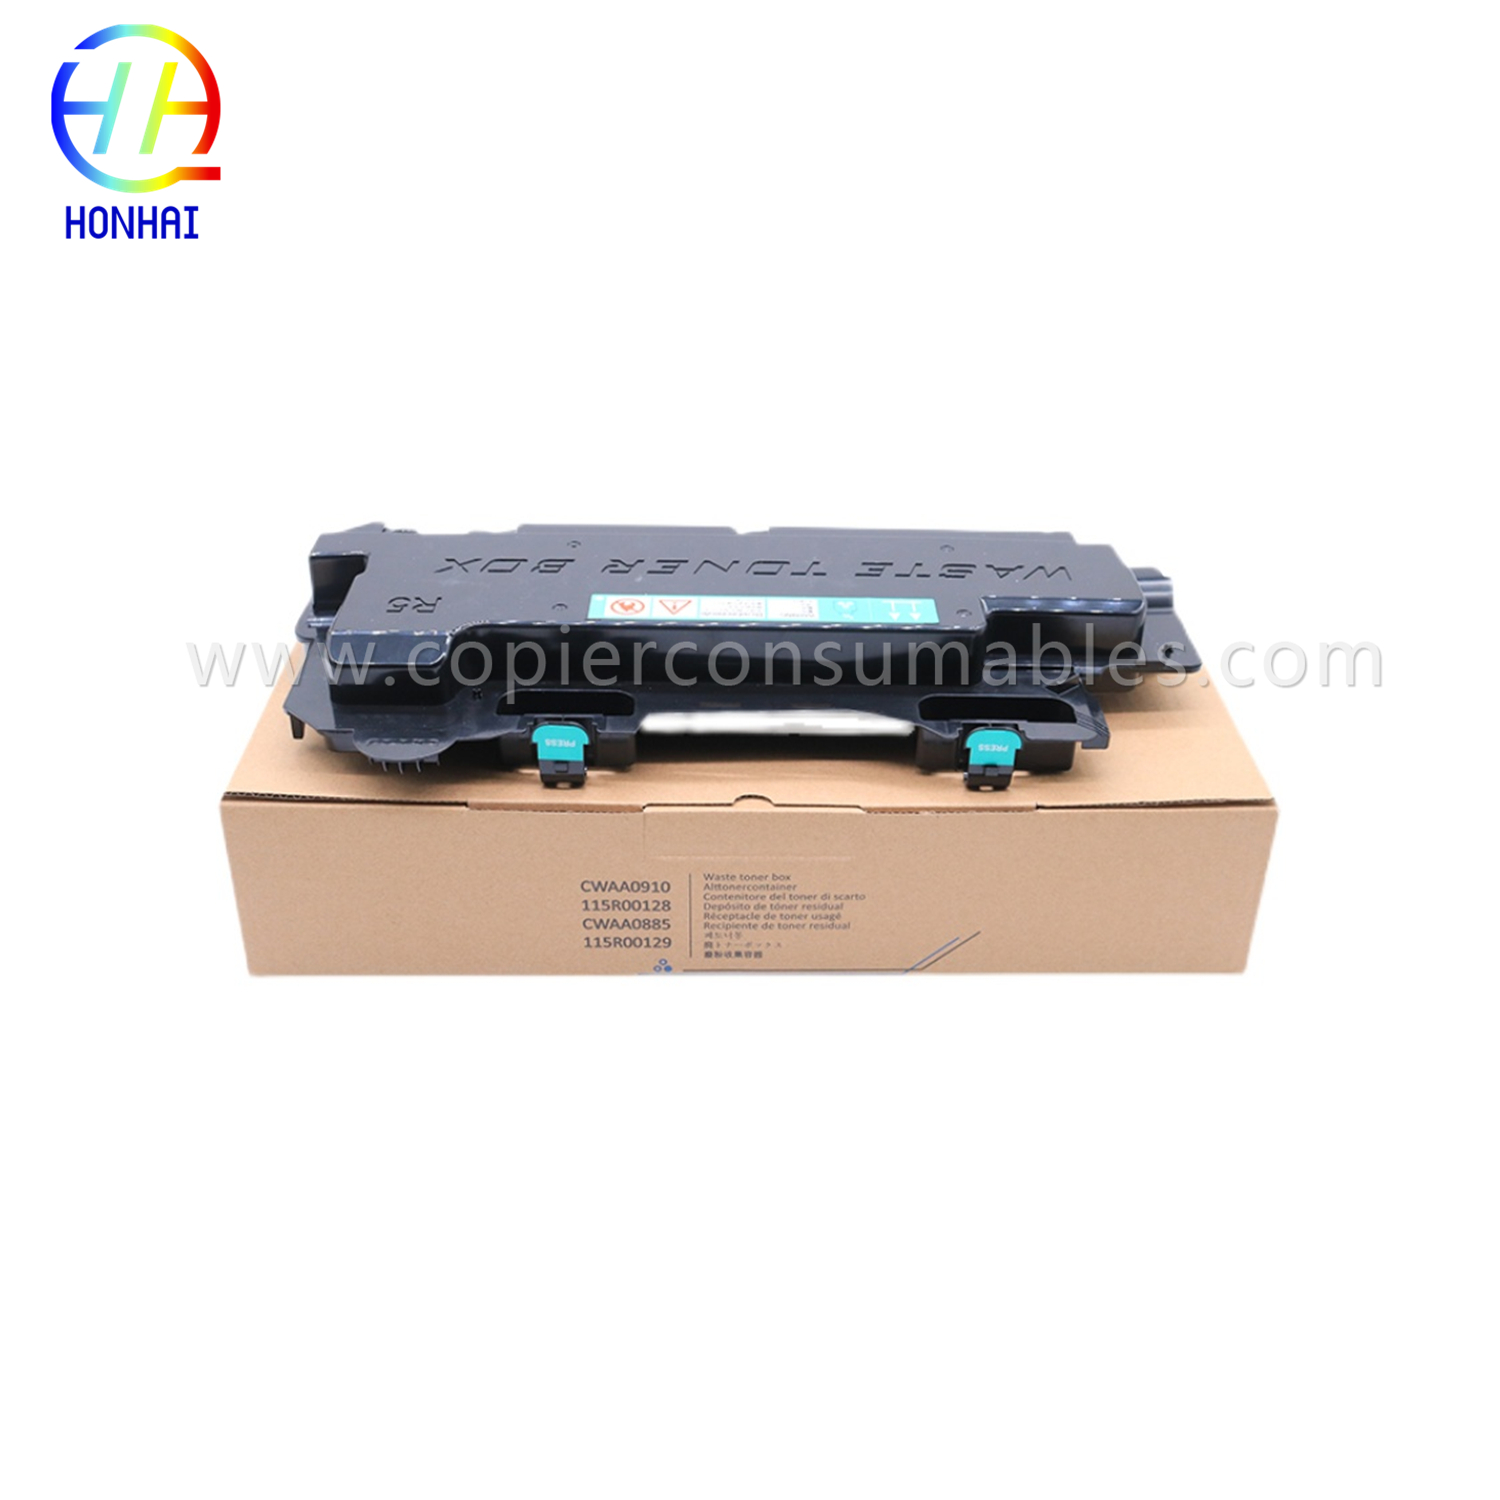 Waste Toner Container for Docucentre IV C2260 C2263 C2265 (CWAA0777) (2)